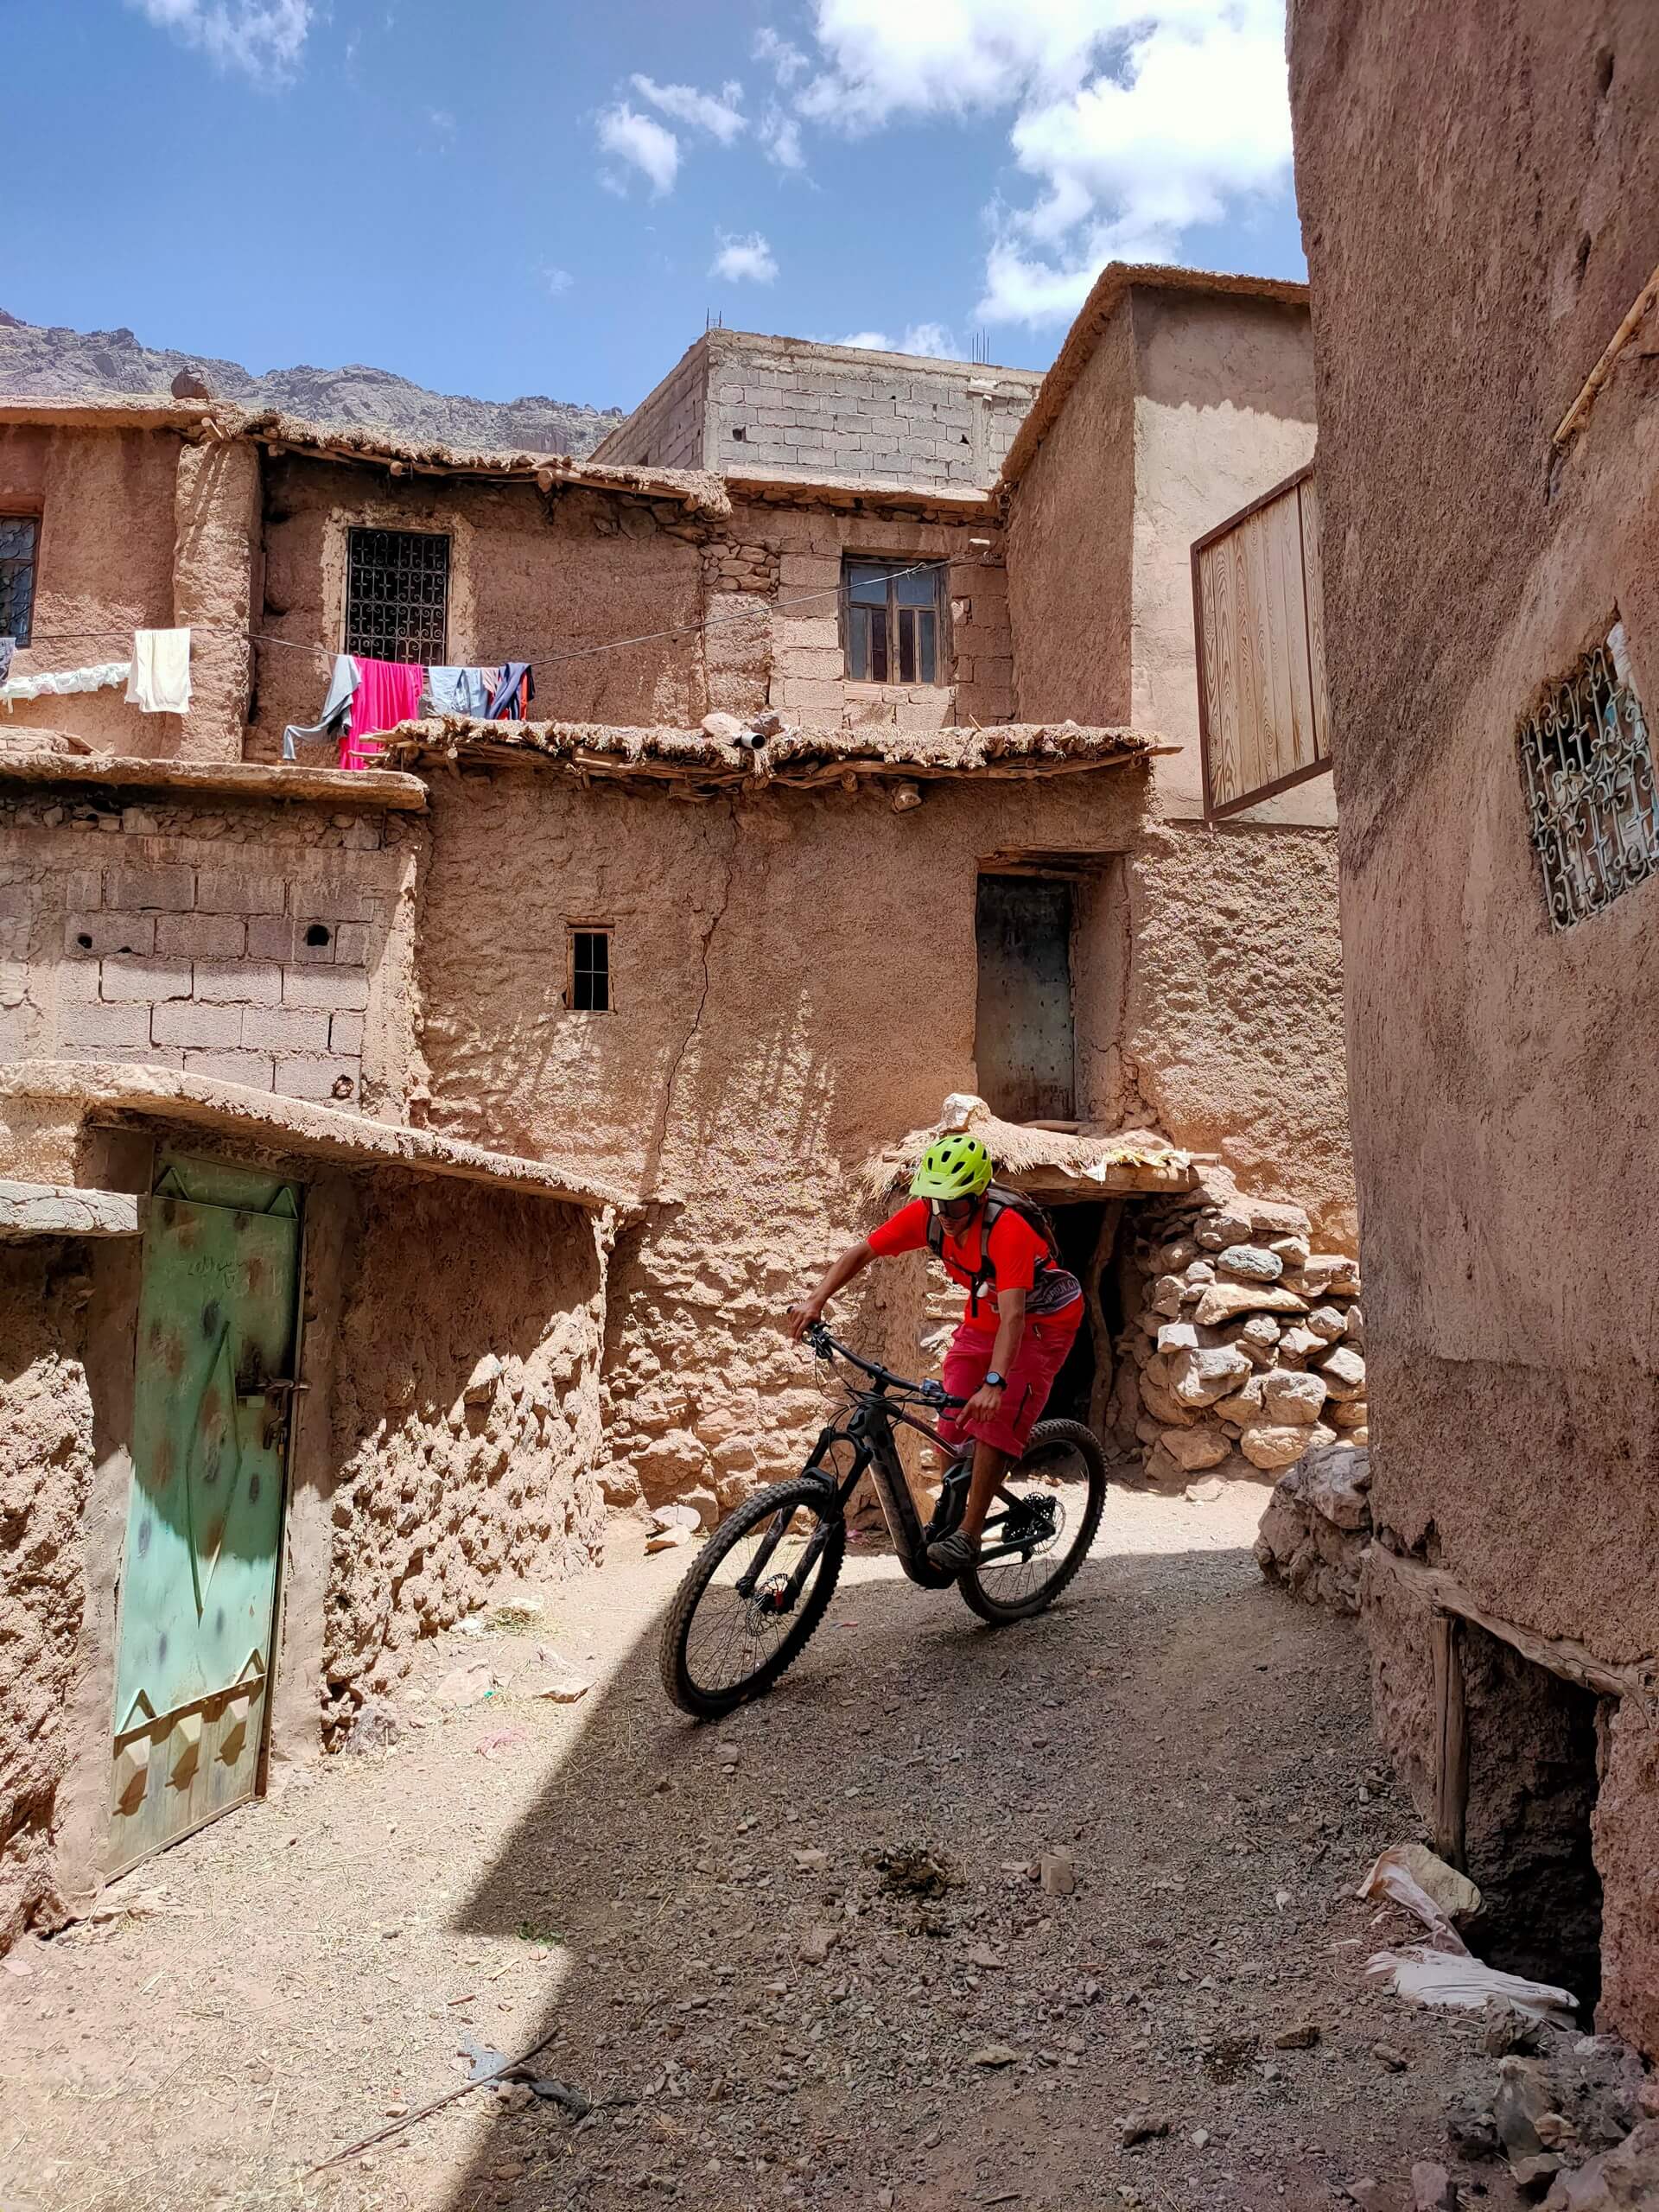 Riding down the path in the small village of Morocco